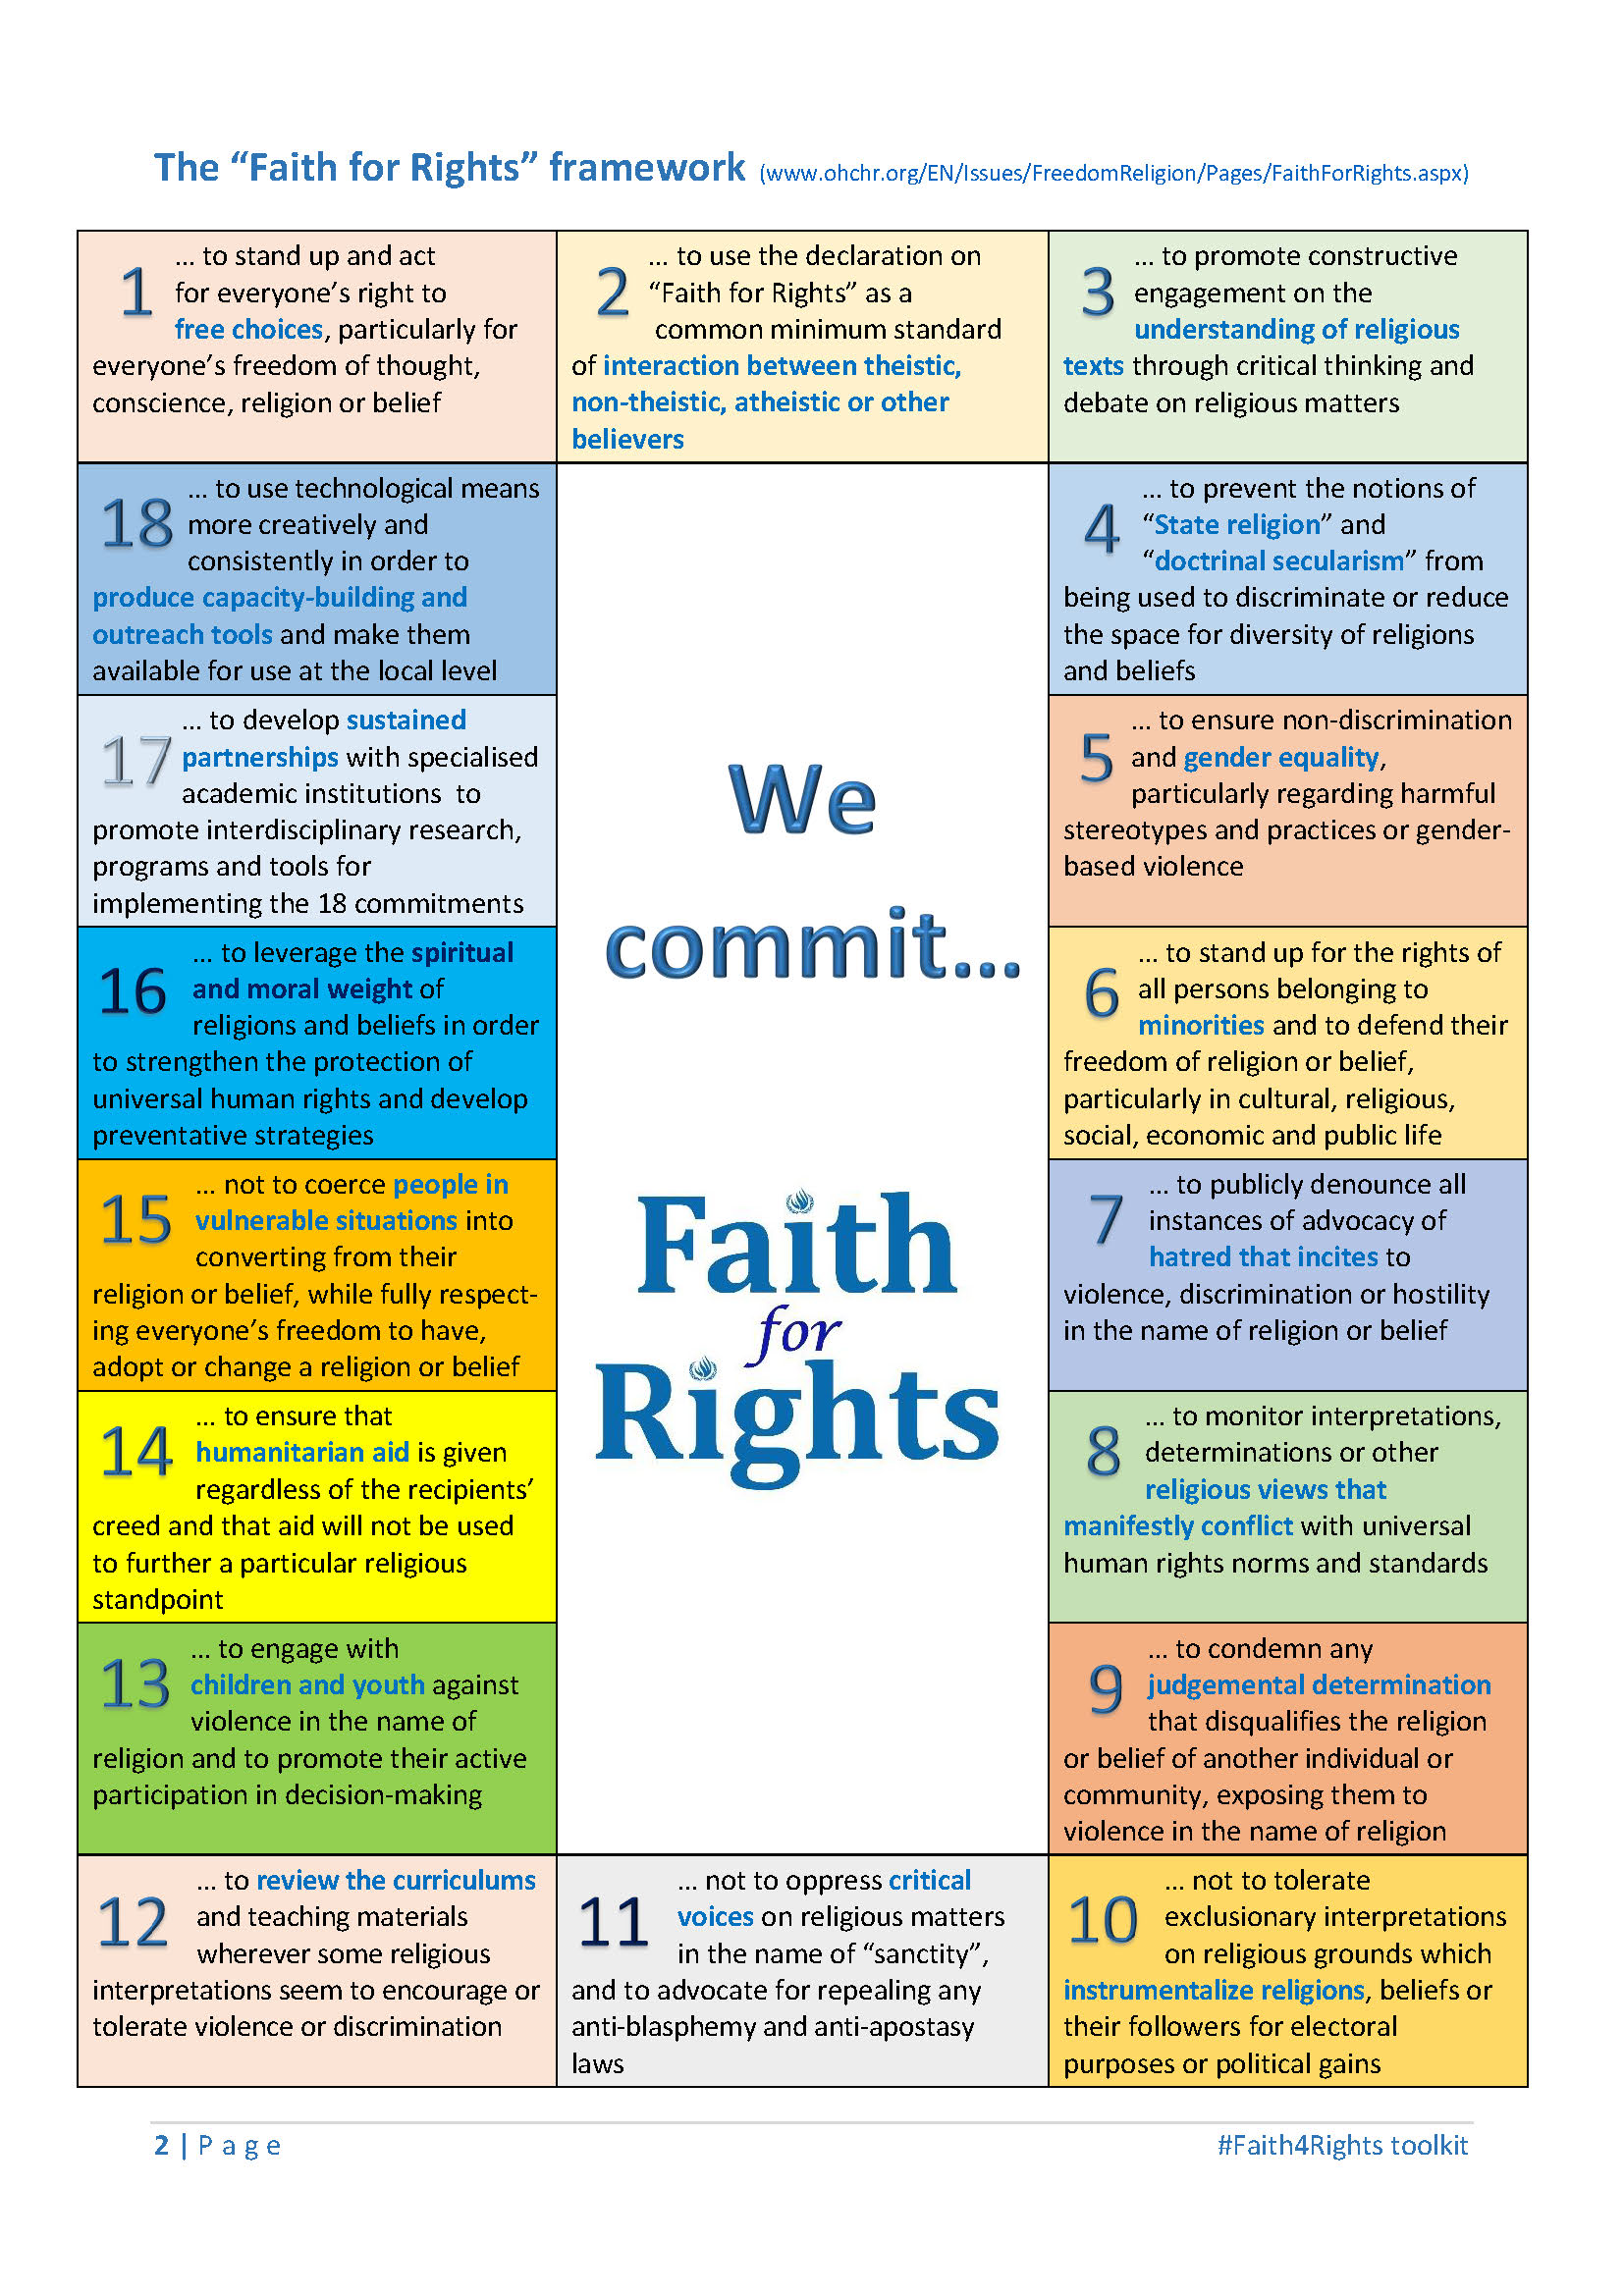 faith for rights image 